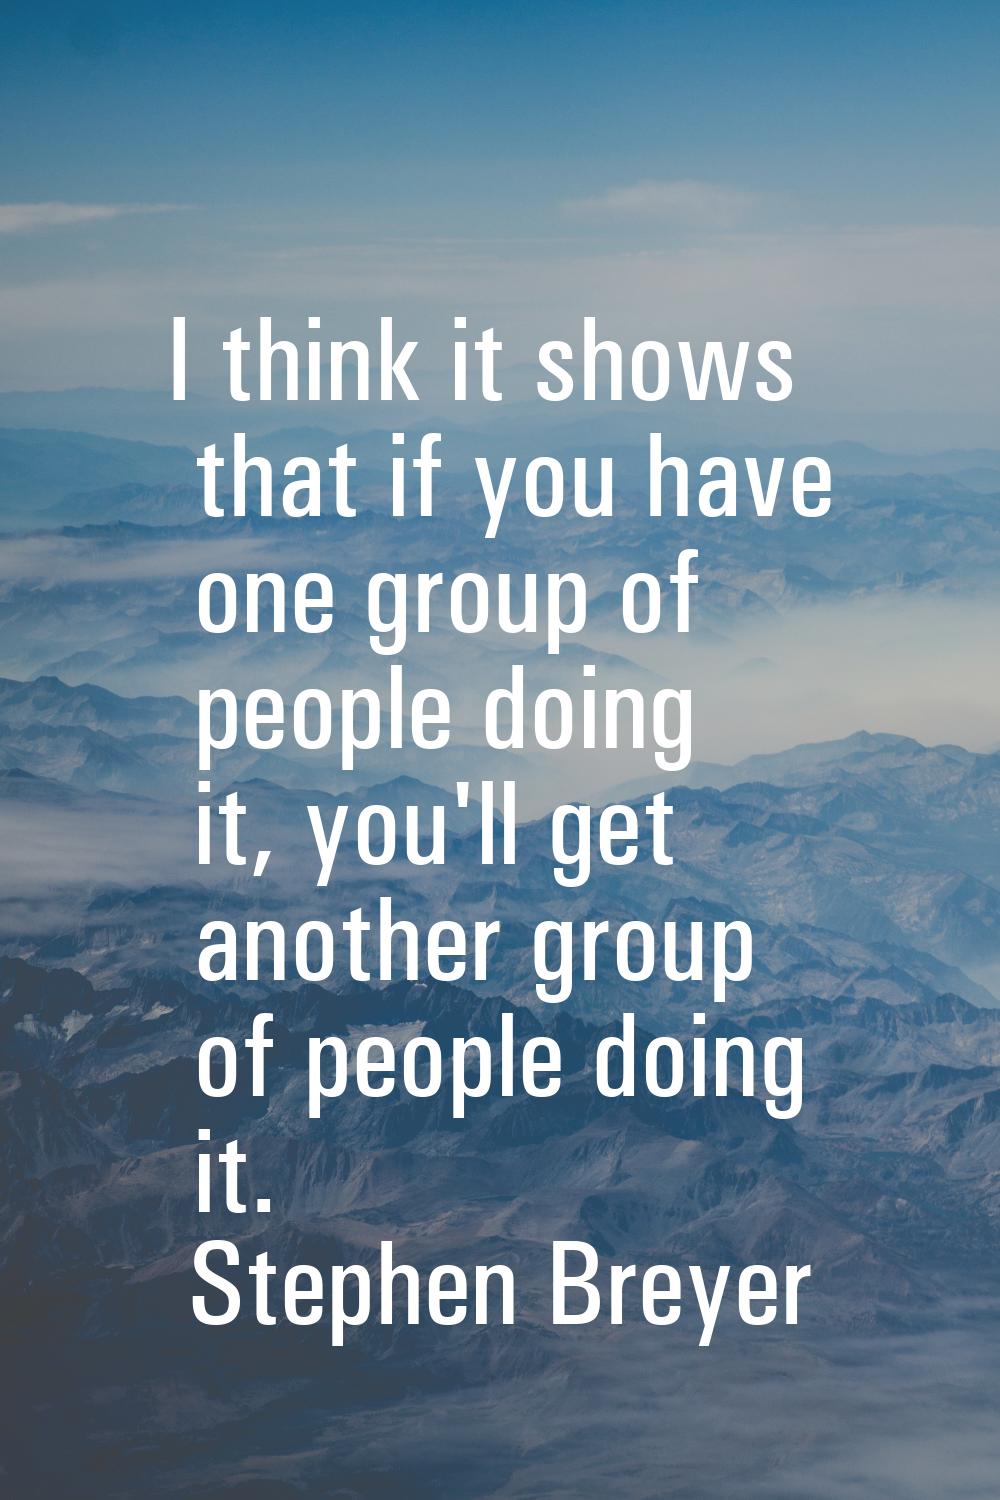 I think it shows that if you have one group of people doing it, you'll get another group of people 